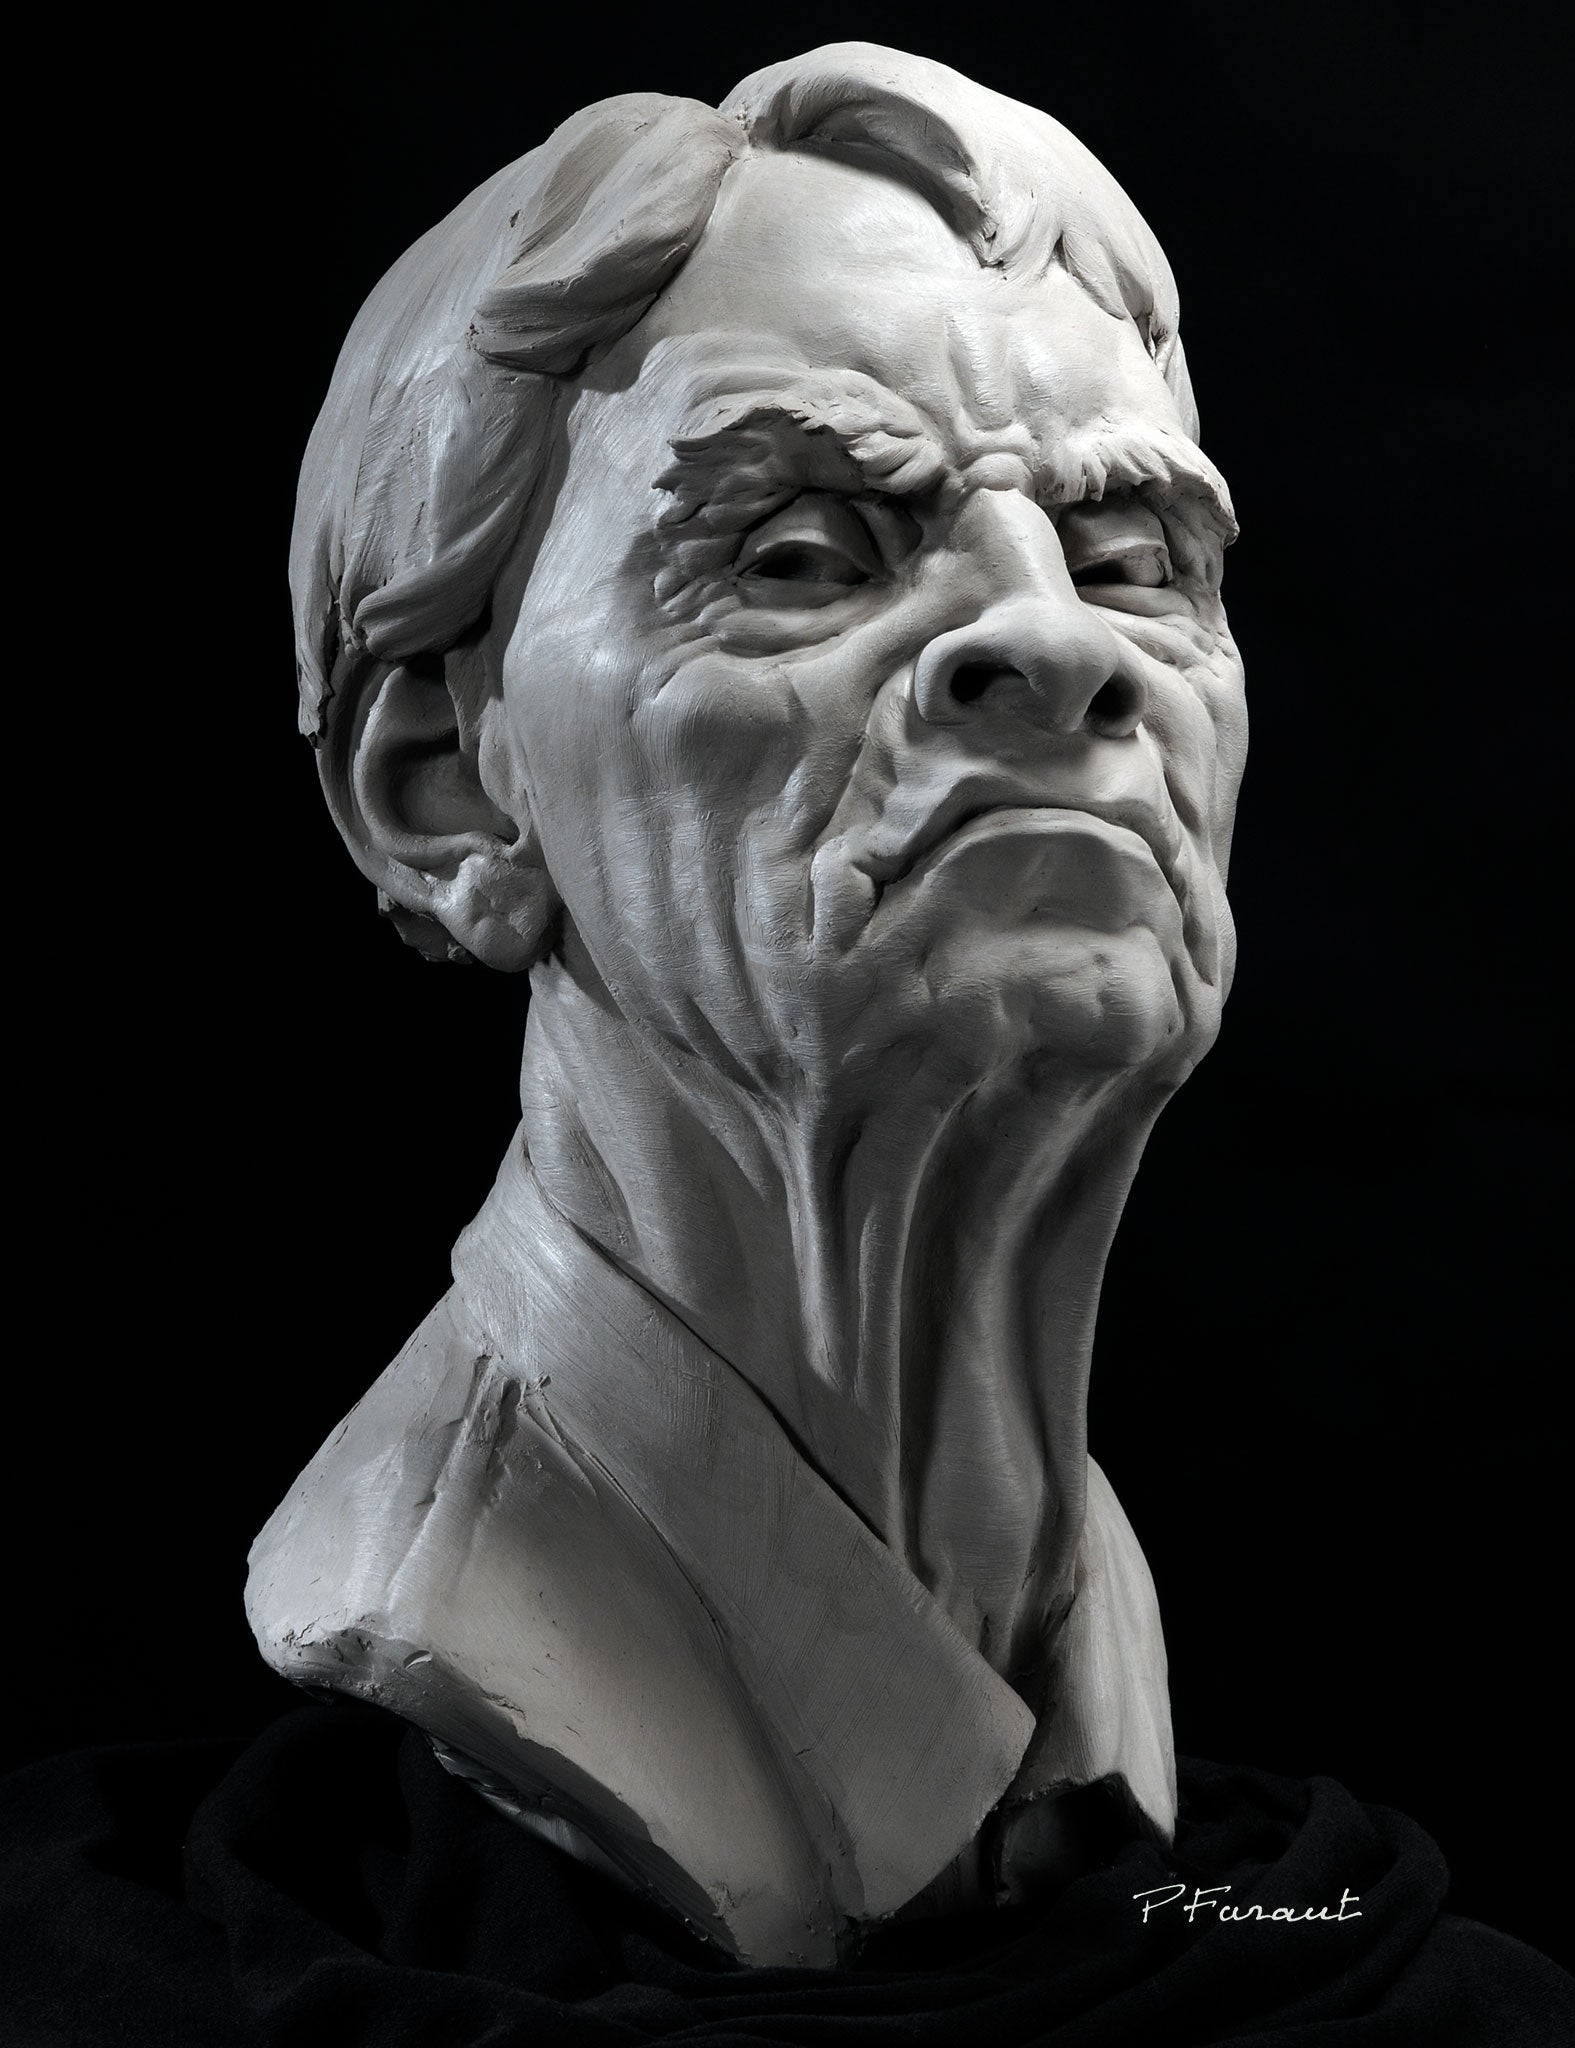 Clay portrait sculpture of an art critic with expression of disdain by Philippe Faraut